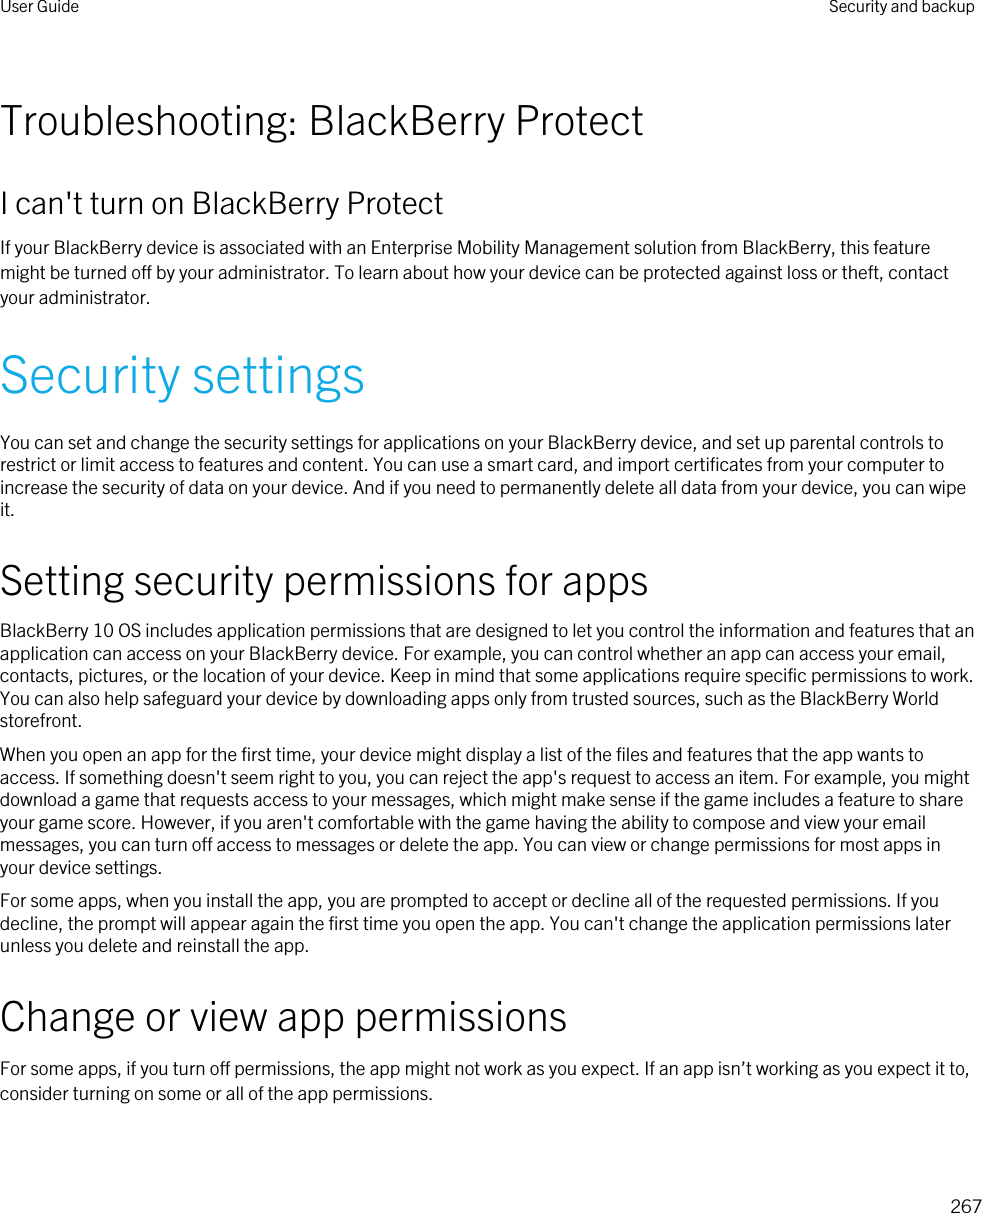 Troubleshooting: BlackBerry ProtectI can&apos;t turn on BlackBerry ProtectIf your BlackBerry device is associated with an Enterprise Mobility Management solution from BlackBerry, this feature might be turned off by your administrator. To learn about how your device can be protected against loss or theft, contact your administrator.Security settingsYou can set and change the security settings for applications on your BlackBerry device, and set up parental controls to restrict or limit access to features and content. You can use a smart card, and import certificates from your computer to increase the security of data on your device. And if you need to permanently delete all data from your device, you can wipe it.Setting security permissions for appsBlackBerry 10 OS includes application permissions that are designed to let you control the information and features that an application can access on your BlackBerry device. For example, you can control whether an app can access your email, contacts, pictures, or the location of your device. Keep in mind that some applications require specific permissions to work. You can also help safeguard your device by downloading apps only from trusted sources, such as the BlackBerry World storefront.When you open an app for the first time, your device might display a list of the files and features that the app wants to access. If something doesn&apos;t seem right to you, you can reject the app&apos;s request to access an item. For example, you might download a game that requests access to your messages, which might make sense if the game includes a feature to share your game score. However, if you aren&apos;t comfortable with the game having the ability to compose and view your email messages, you can turn off access to messages or delete the app. You can view or change permissions for most apps in your device settings.For some apps, when you install the app, you are prompted to accept or decline all of the requested permissions. If you decline, the prompt will appear again the first time you open the app. You can&apos;t change the application permissions later unless you delete and reinstall the app.Change or view app permissionsFor some apps, if you turn off permissions, the app might not work as you expect. If an app isn’t working as you expect it to, consider turning on some or all of the app permissions.User Guide Security and backup267